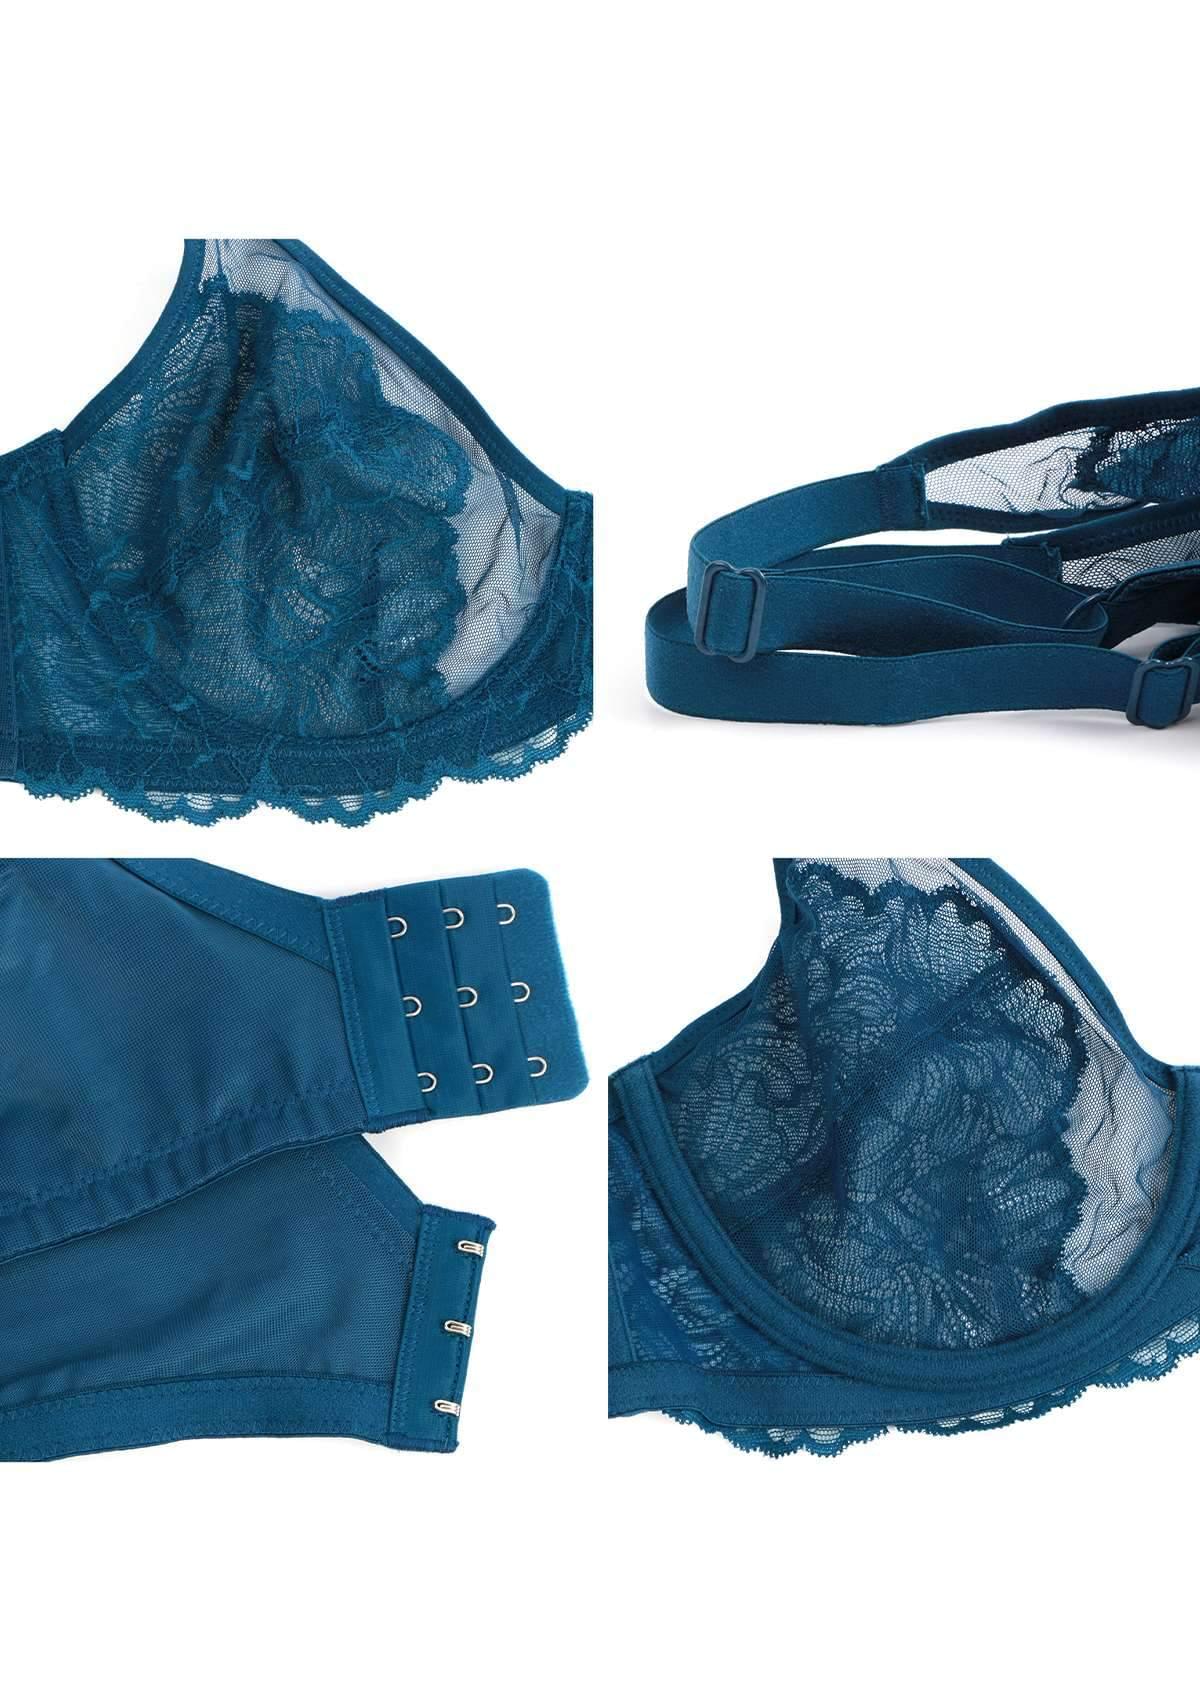 HSIA Blossom Lace Bra And Underwear Sets: Comfortable Plus Size Bra - Biscay Blue / 36 / D